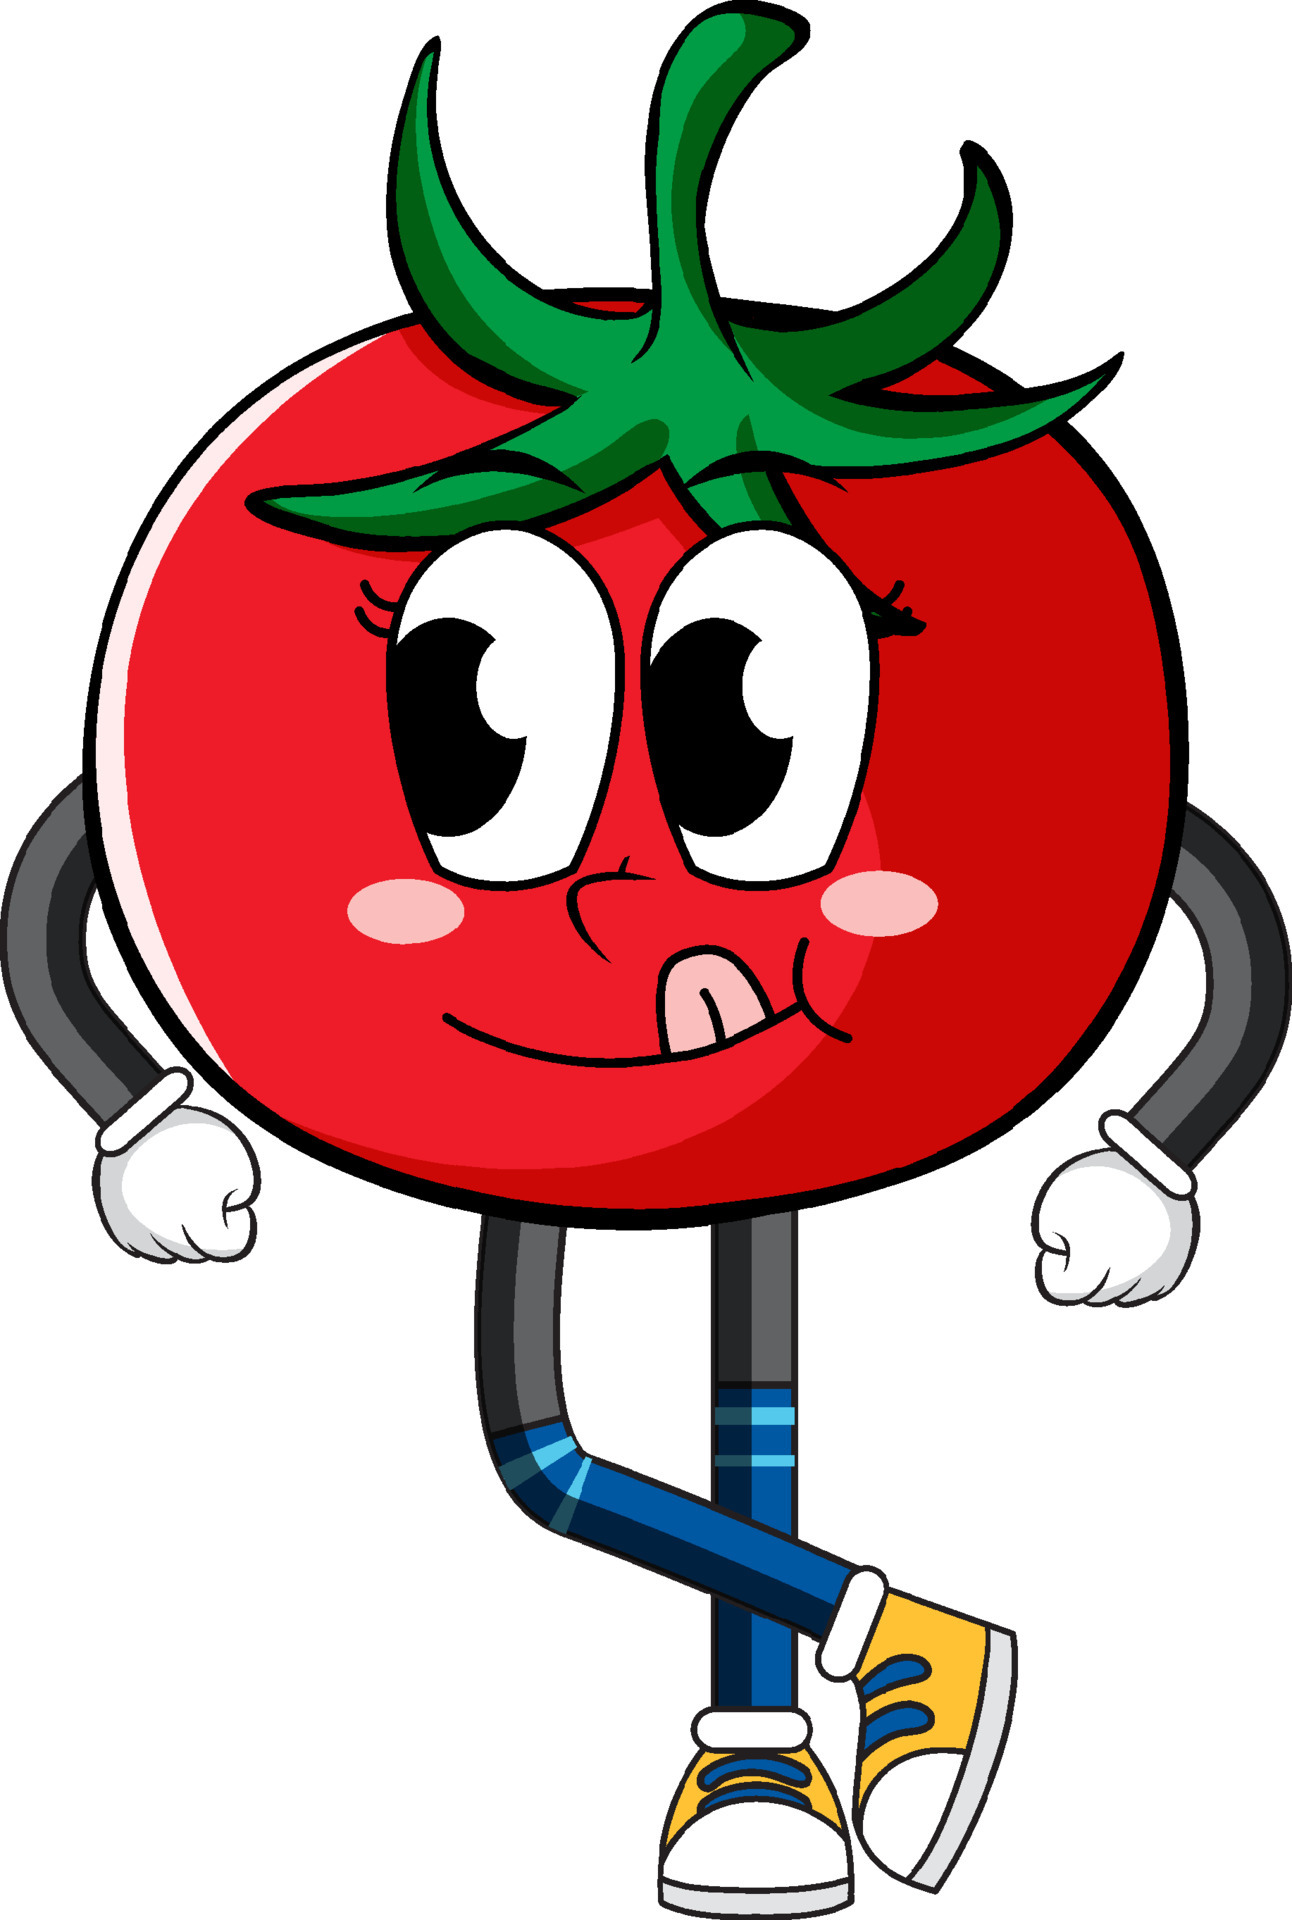 Tomato with arms and legs 7142369 Vector Art at Vecteezy